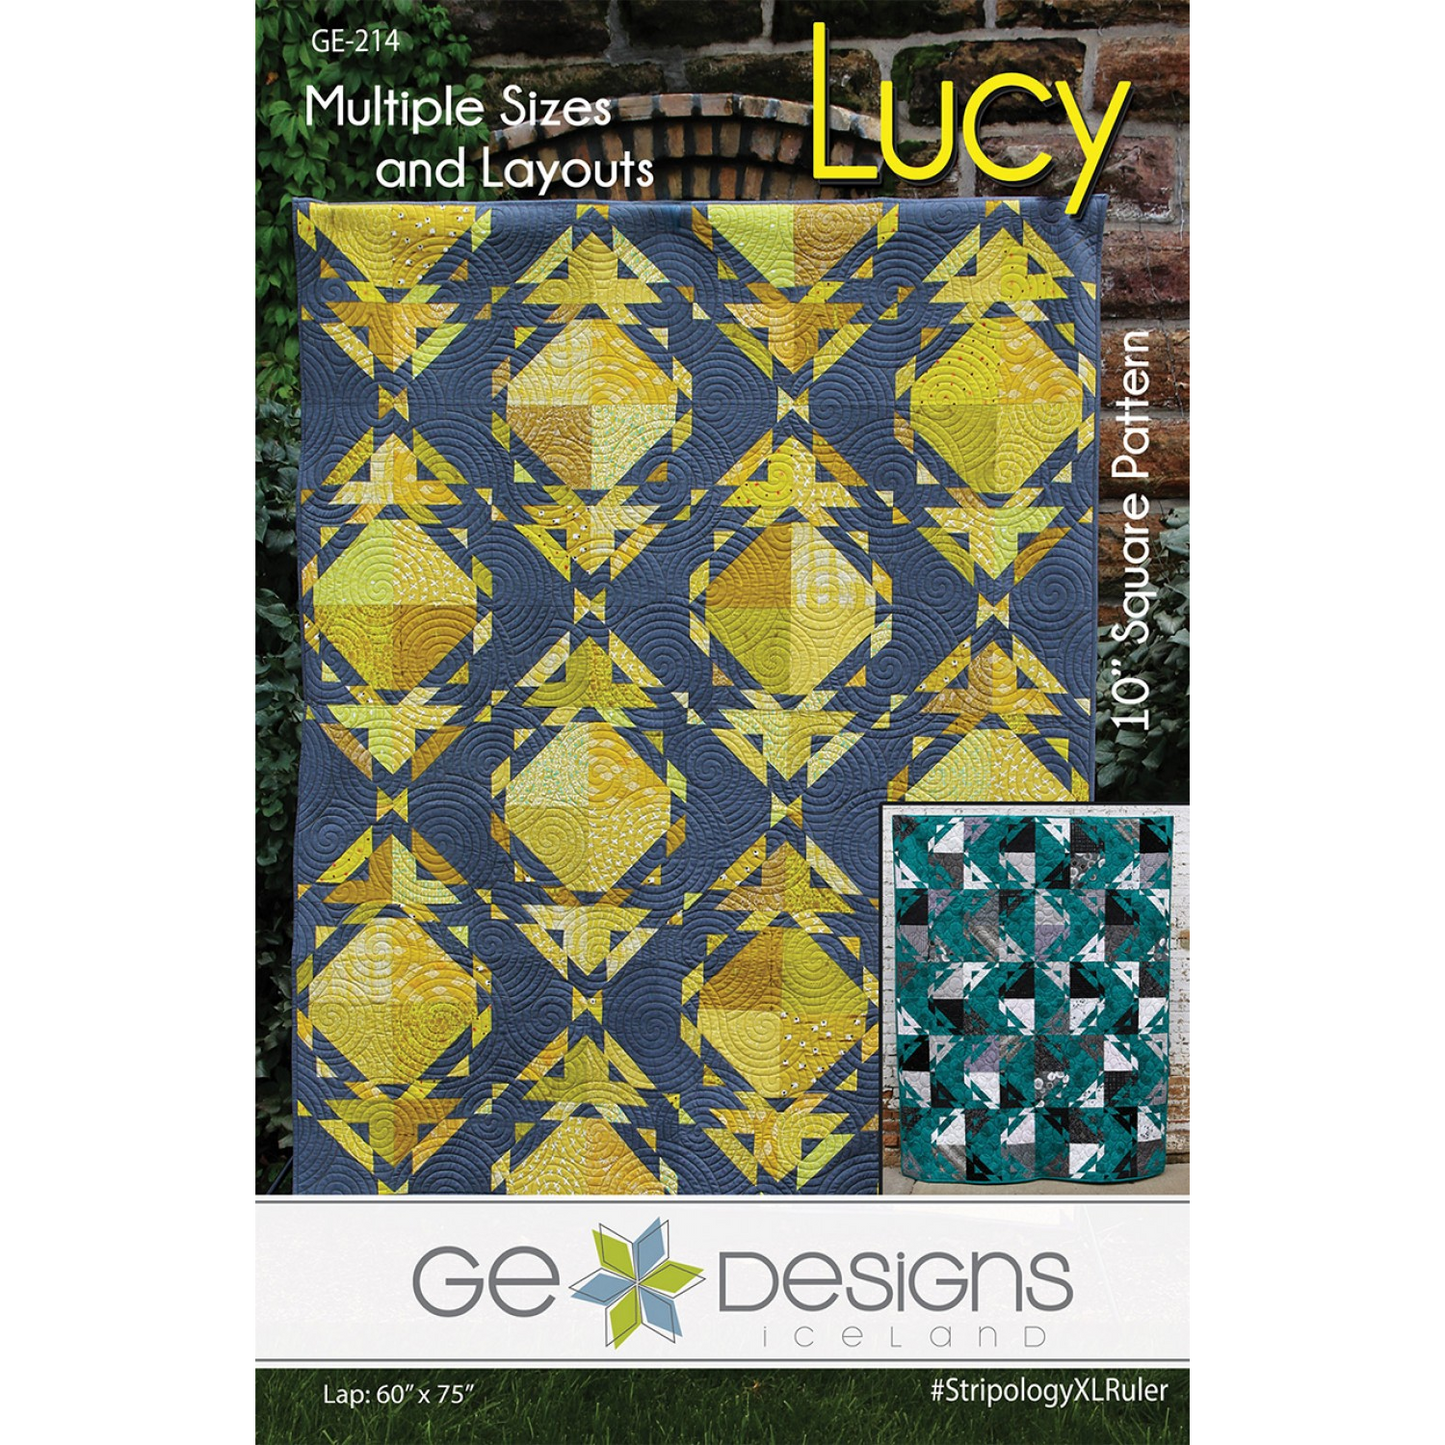 Lucy | GE Designs